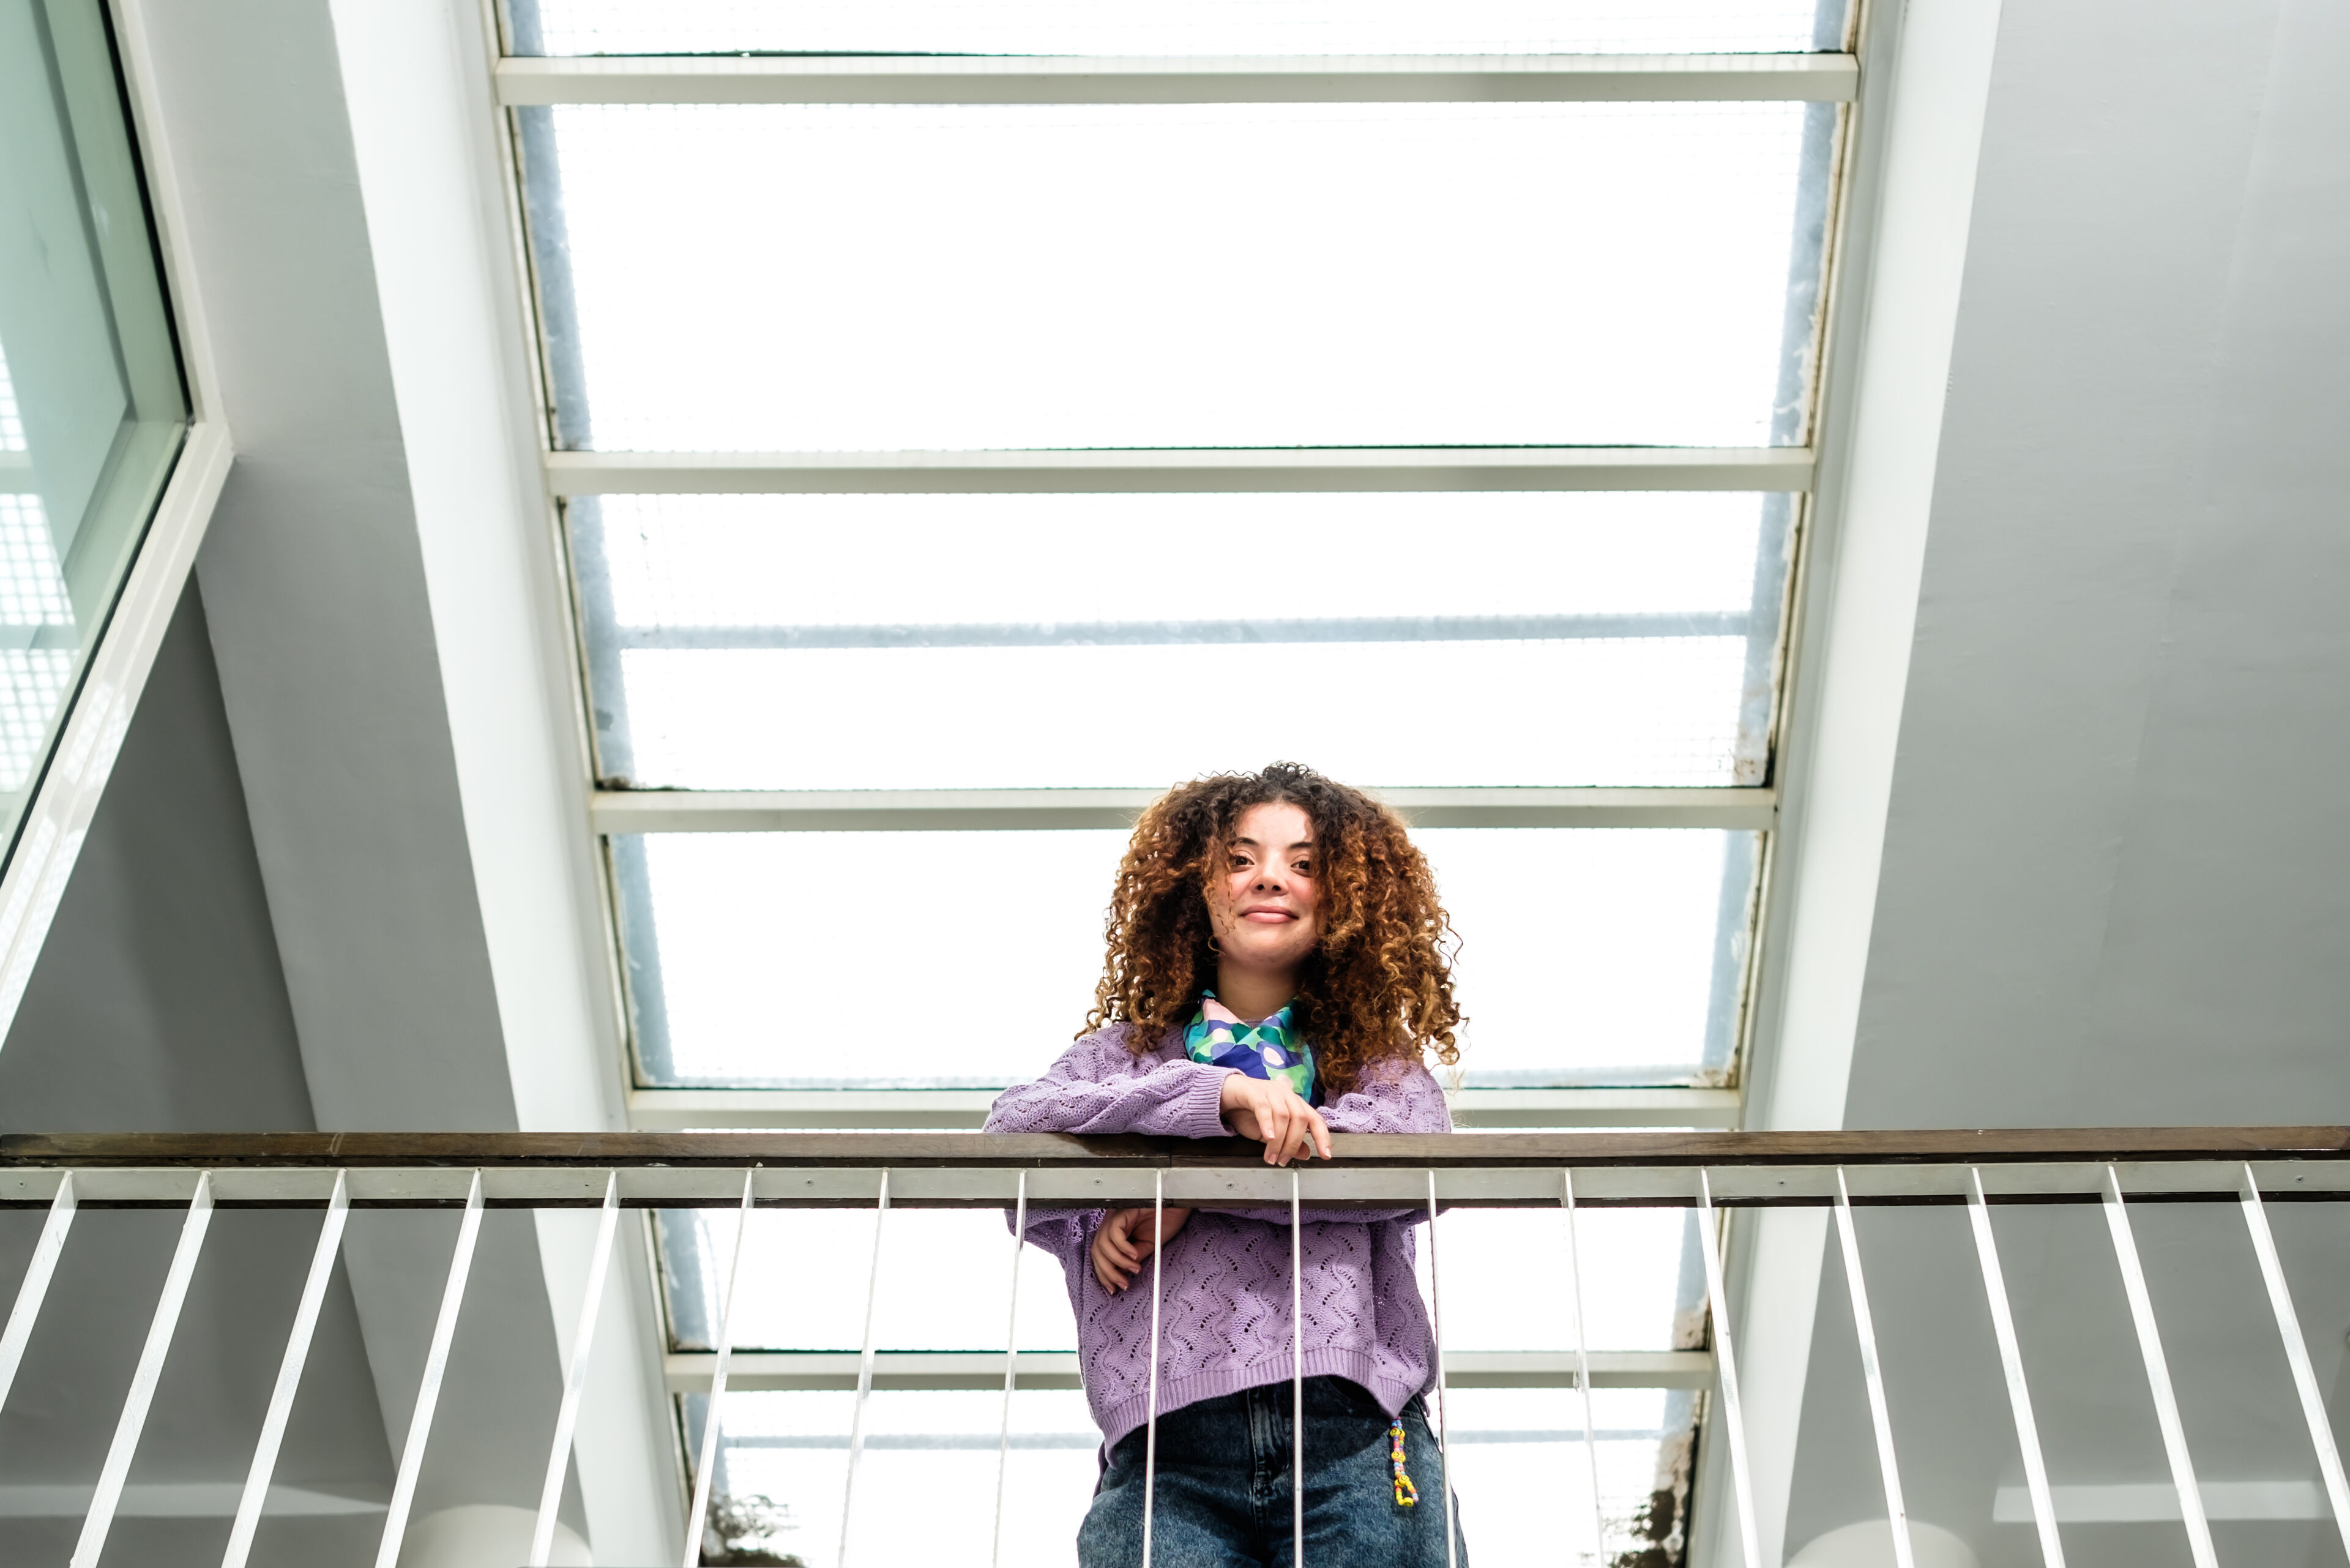 A cheerful woman with curly hair leans on a metal railing, basking in the natural light coming through a large skylight above.